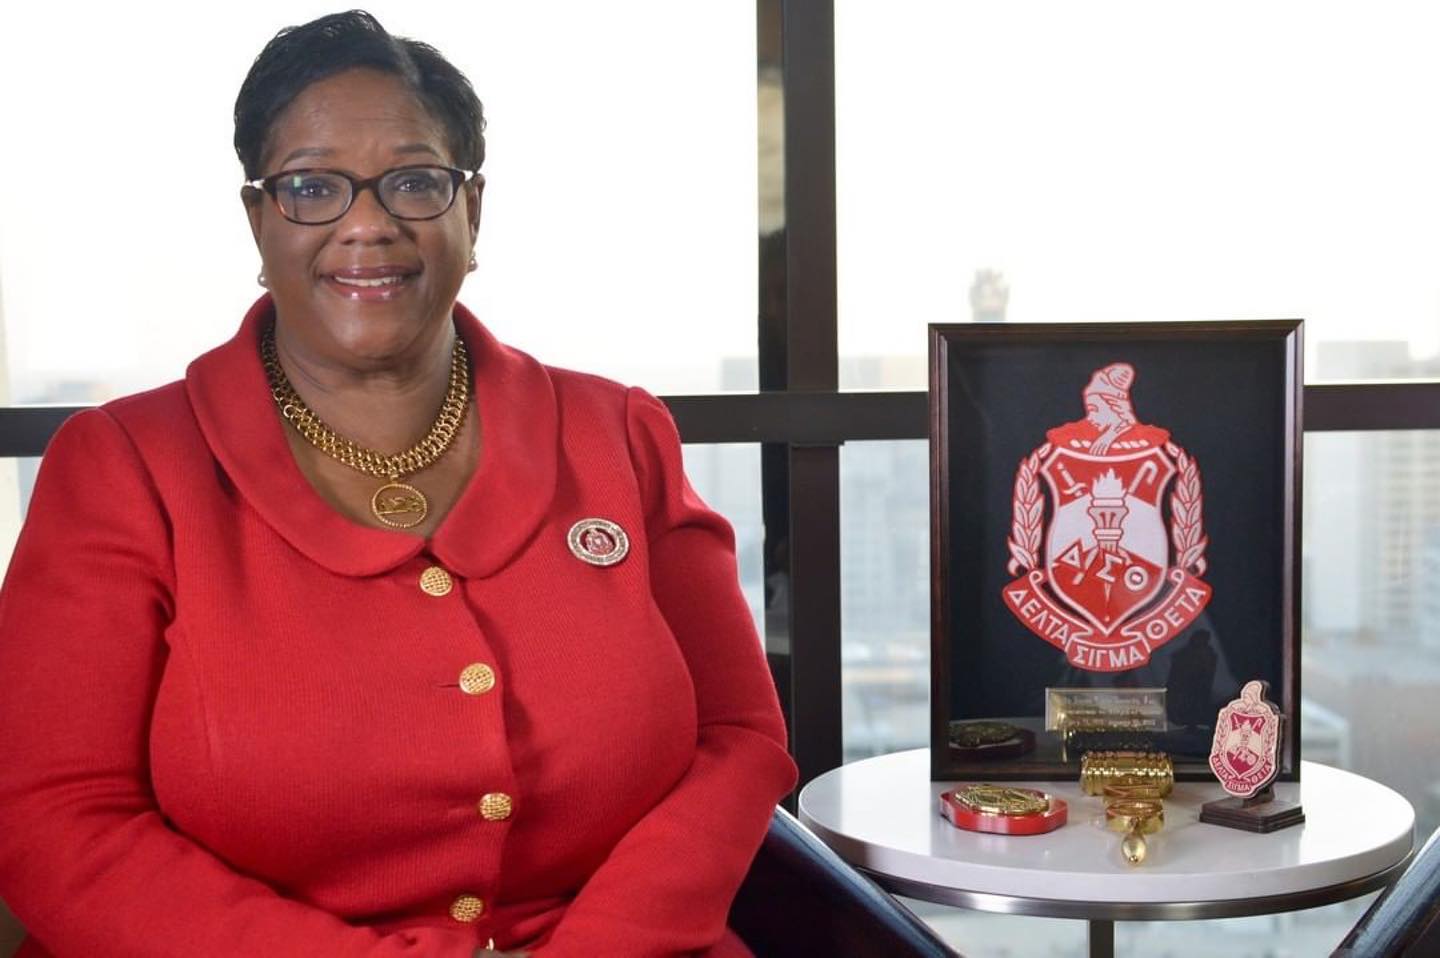 #Repost @dstinc1913
・・・
It is with great sorrow that Delta Sigma Theta Sorority, Inc. shares the passing of our beloved National President and Chair of the National Board of Directors, Cheryl A. Hickmon. President Hickmon transitioned peacefully on January 20, 2022 after a recent illness. 

President Hickmon was a devoted member of Delta Sigma Theta since 1982 and served in various capacities at the chapter, regional, and national levels before being elected National President. She is remembered not only for her role as a leader but for being a colleague, friend, and most of all, sister.

The entire sisterhood of Delta Sigma Theta Sorority, Incorporated mourns the loss of President Hickmon. During this difficult time, we ask that you respect her family’s privacy and keep them in your prayers. 

#DST1913